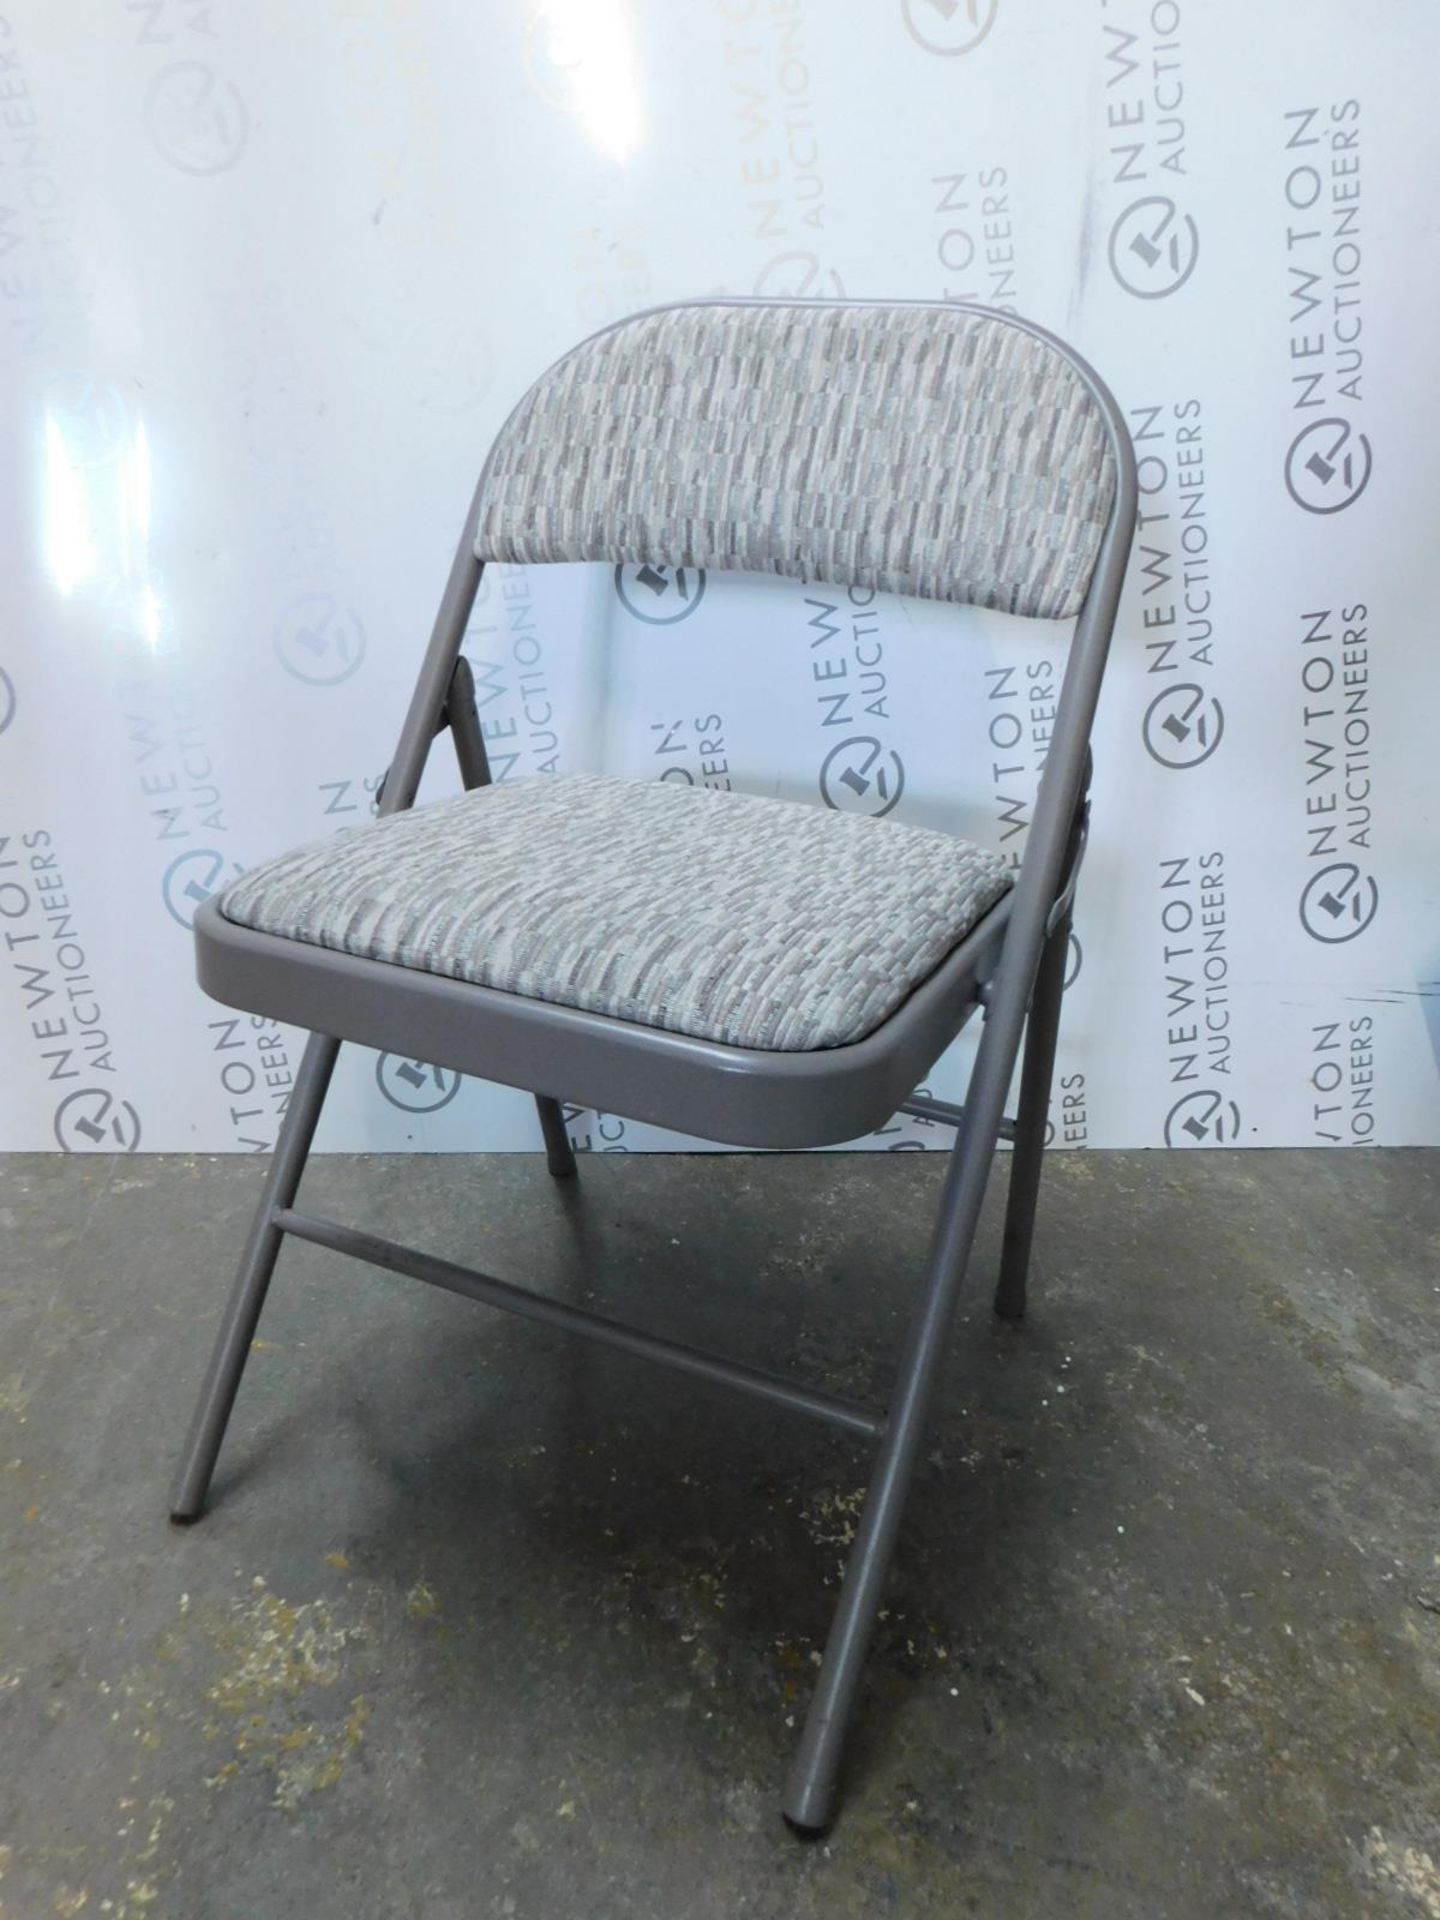 1 MECO DELUXE PADDED STEEL FABRIC FOLDING GUEST CHAIR RRP £29.99